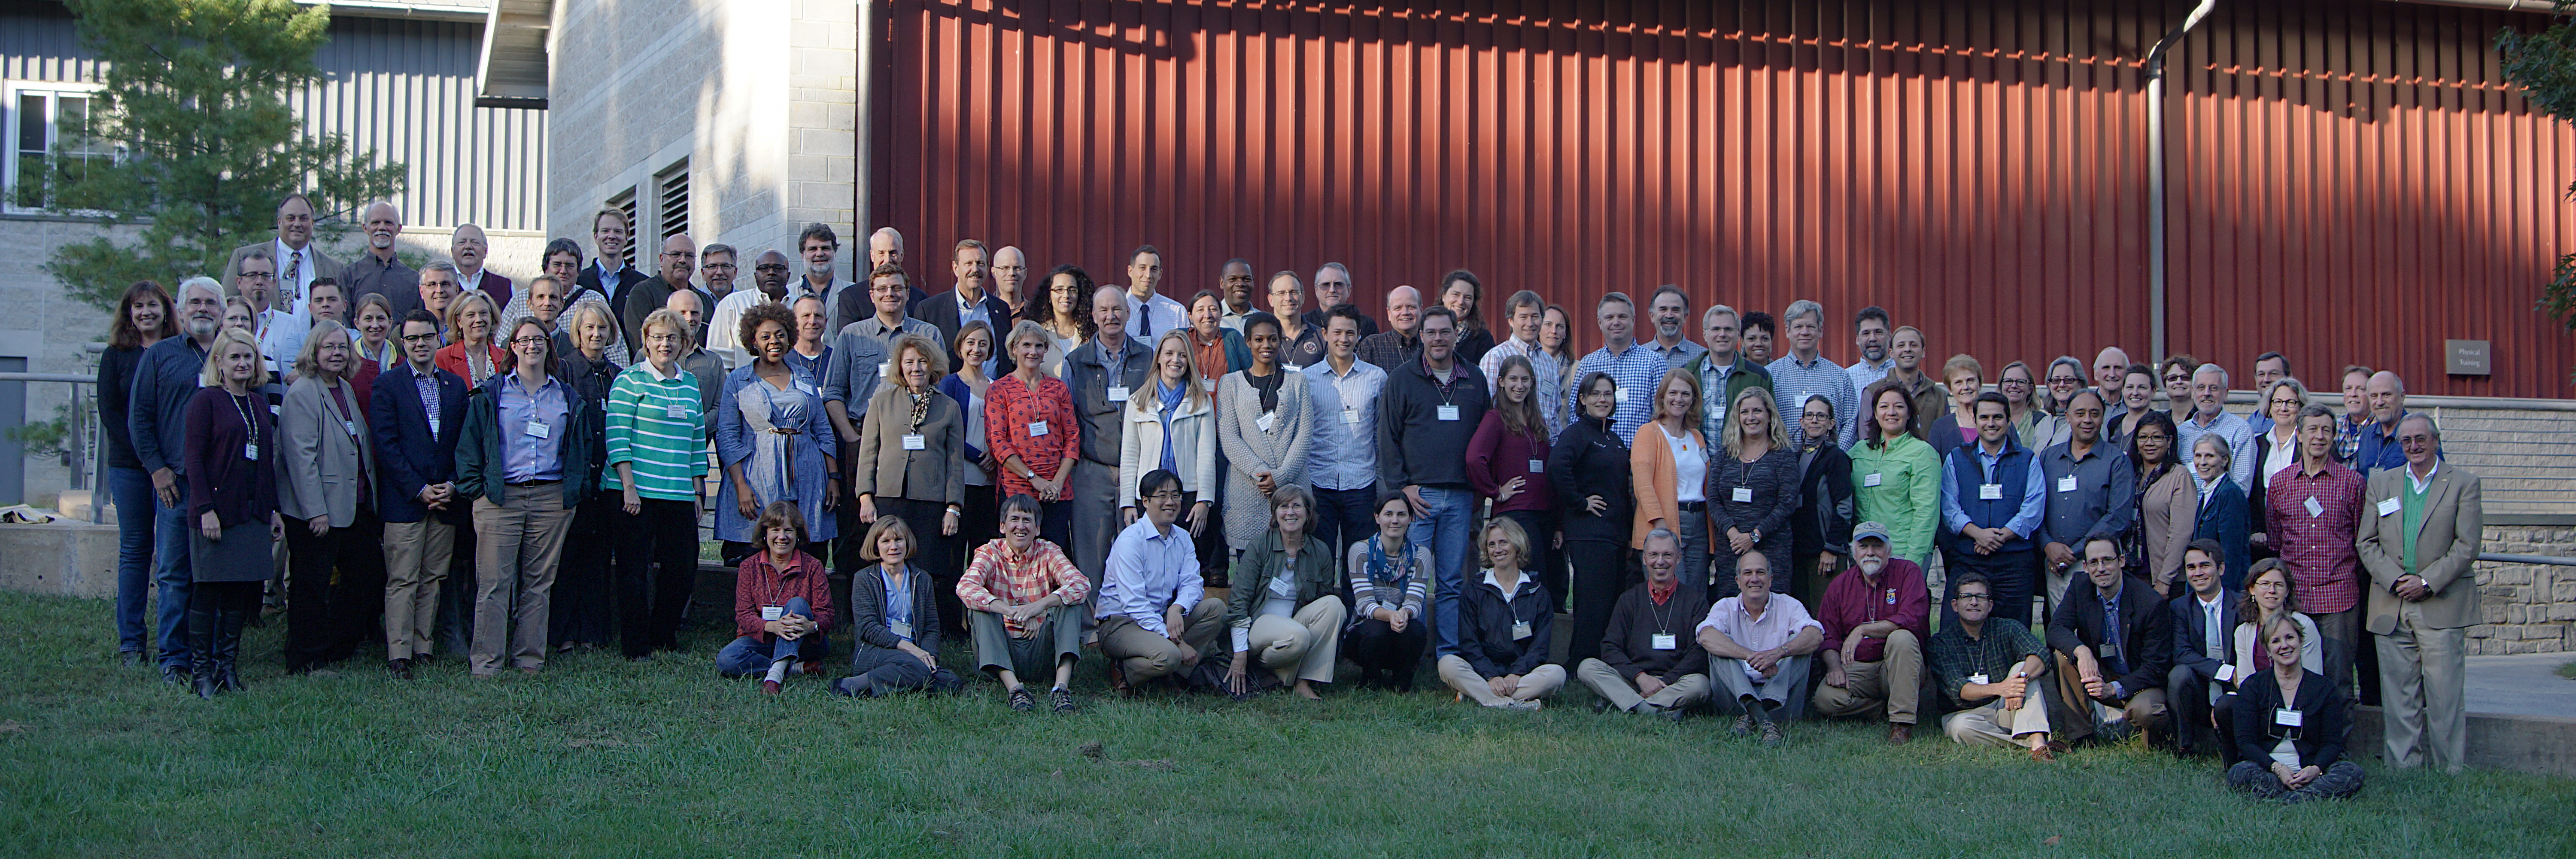 Conservation Partners Convene in Shepherdstown for Sixth Annual Meeting